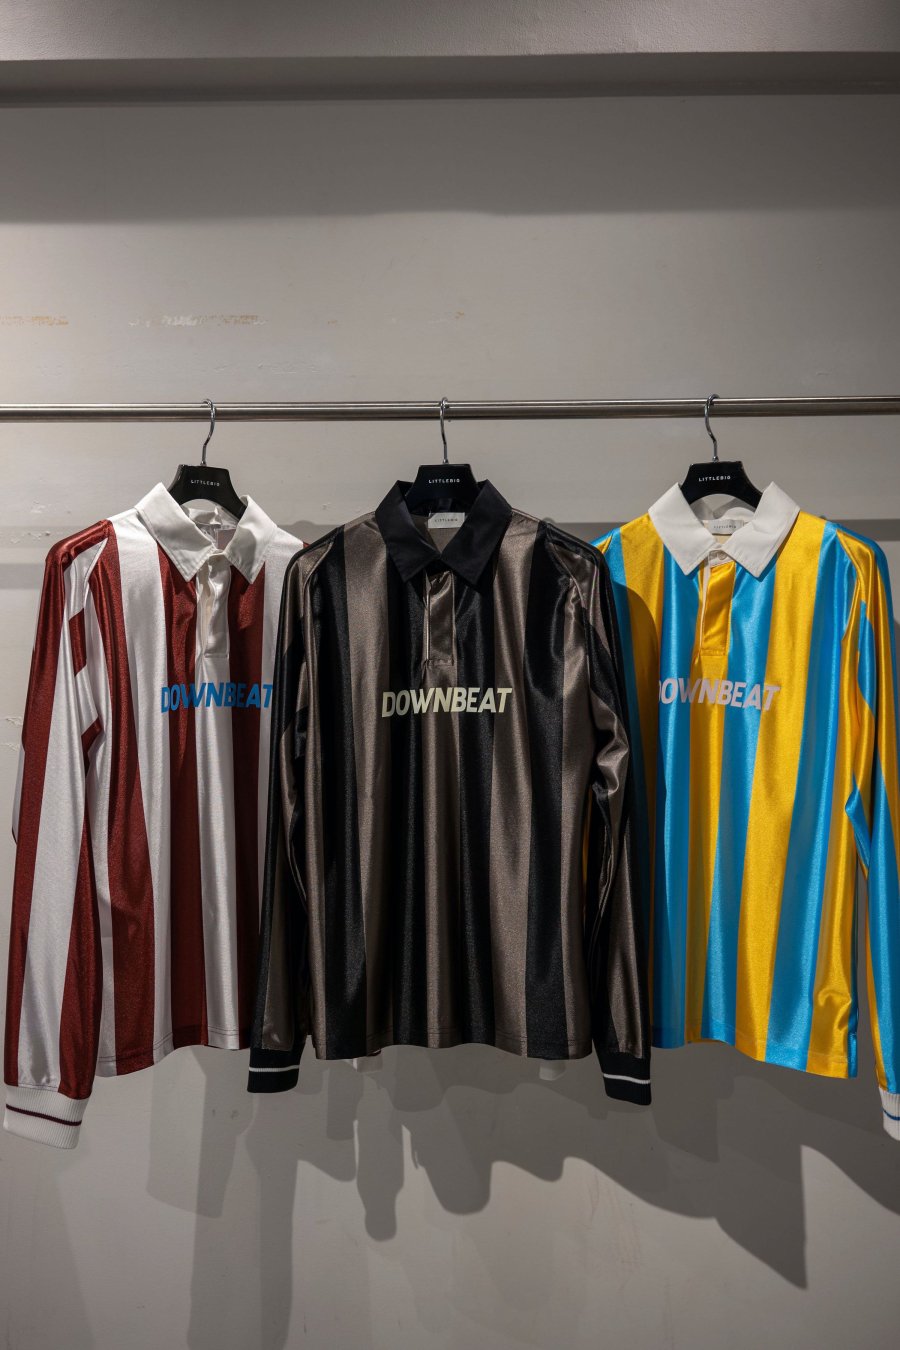 LITTLEBIG  Football SH L/S(White or Black or Blue)<img class='new_mark_img2' src='https://img.shop-pro.jp/img/new/icons15.gif' style='border:none;display:inline;margin:0px;padding:0px;width:auto;' />